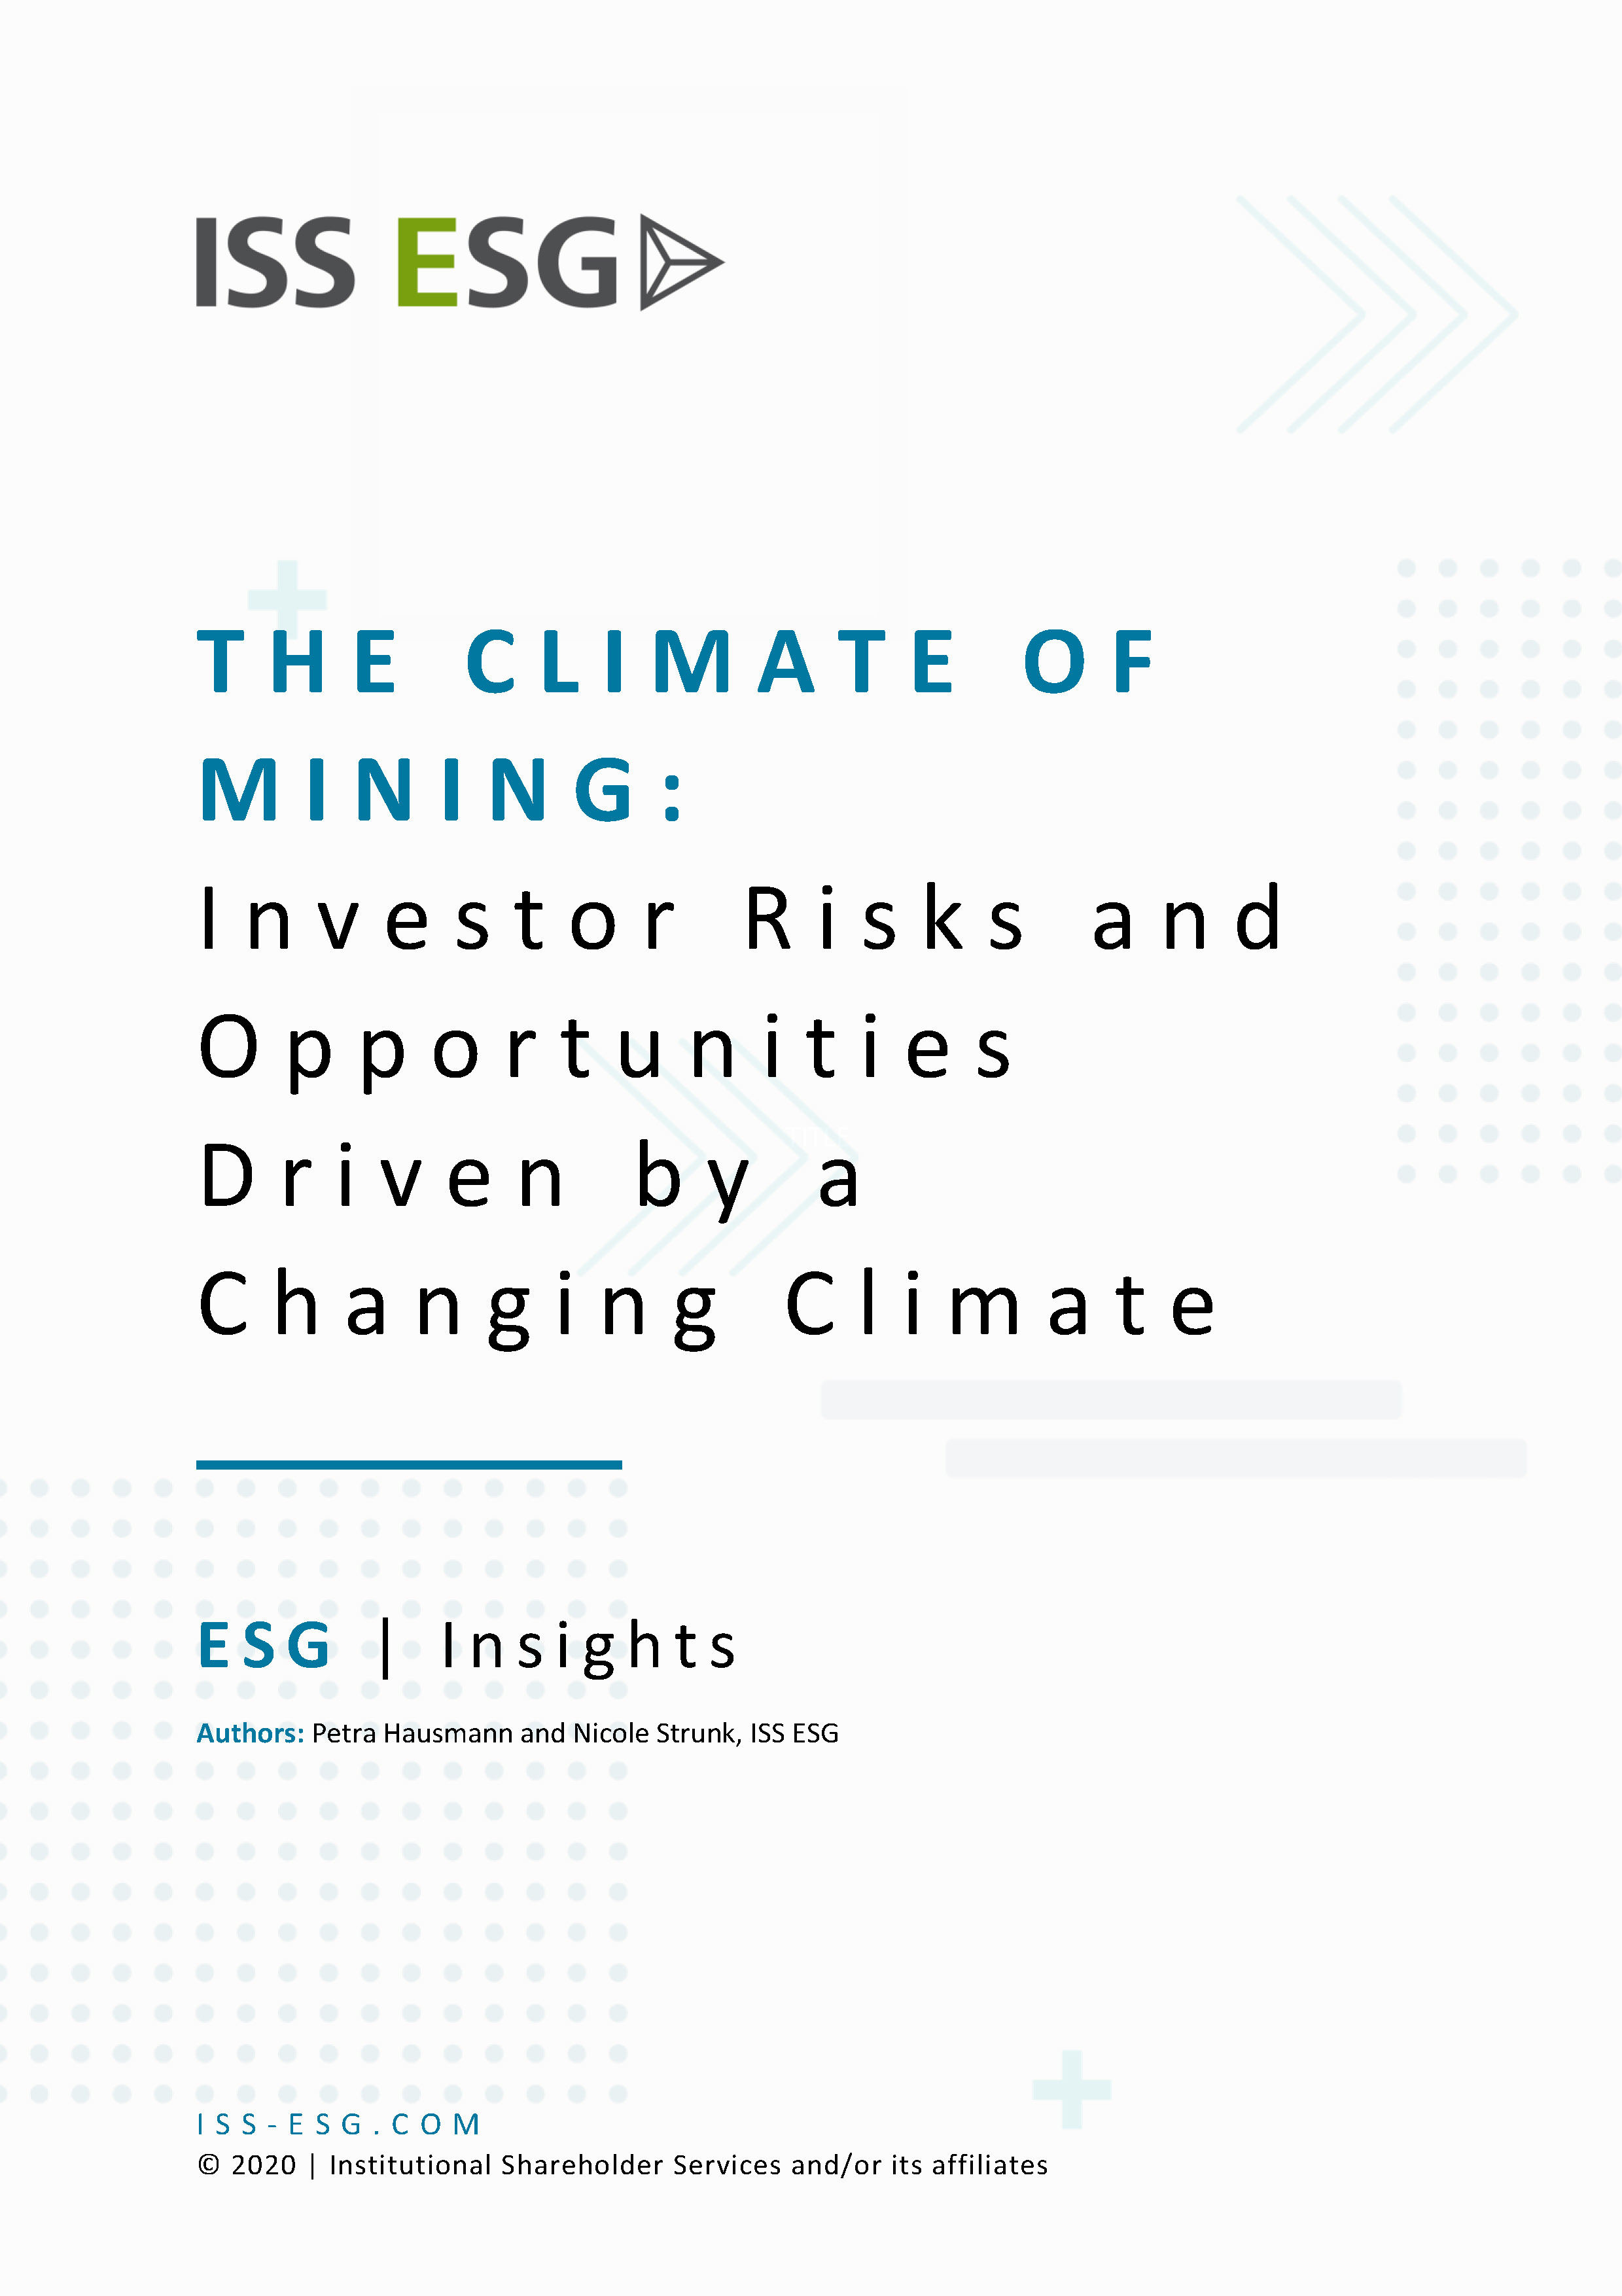 The Climate of Mining: Investor Risks and Opportunities Driven by a Changing Climate